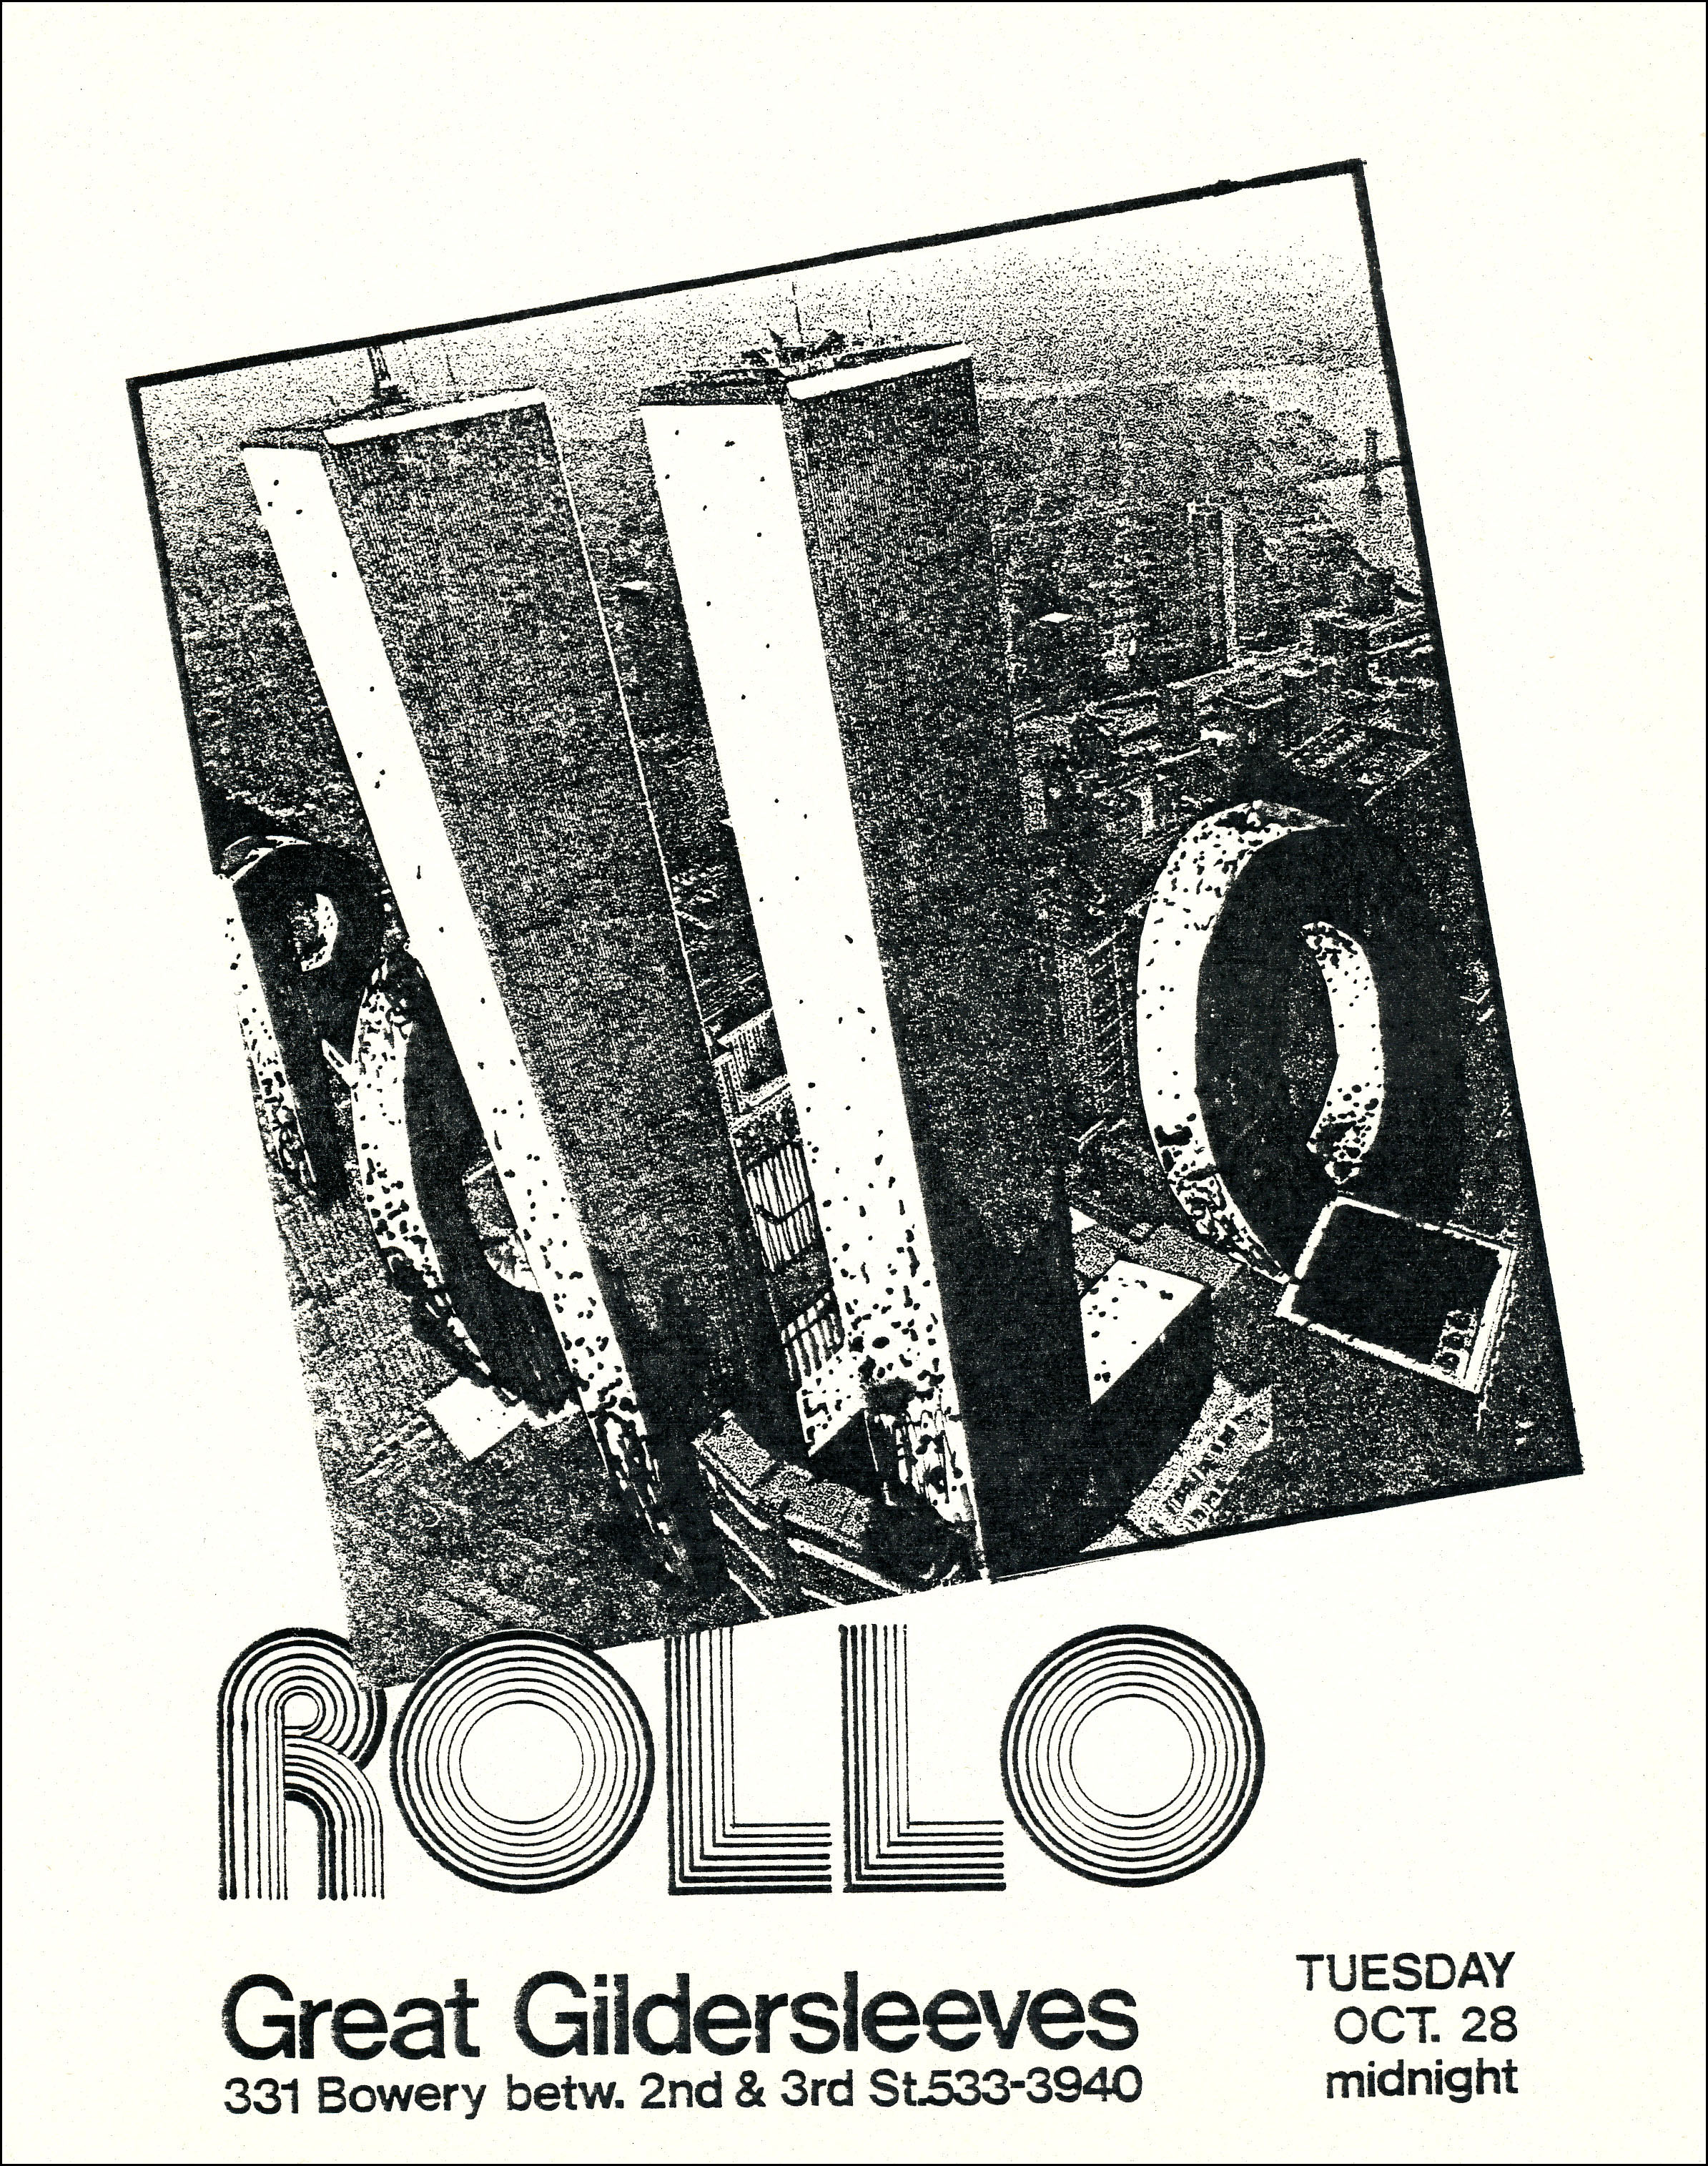 Rollo postcard for Great Gildersleeves for 10-28-1980 performance.